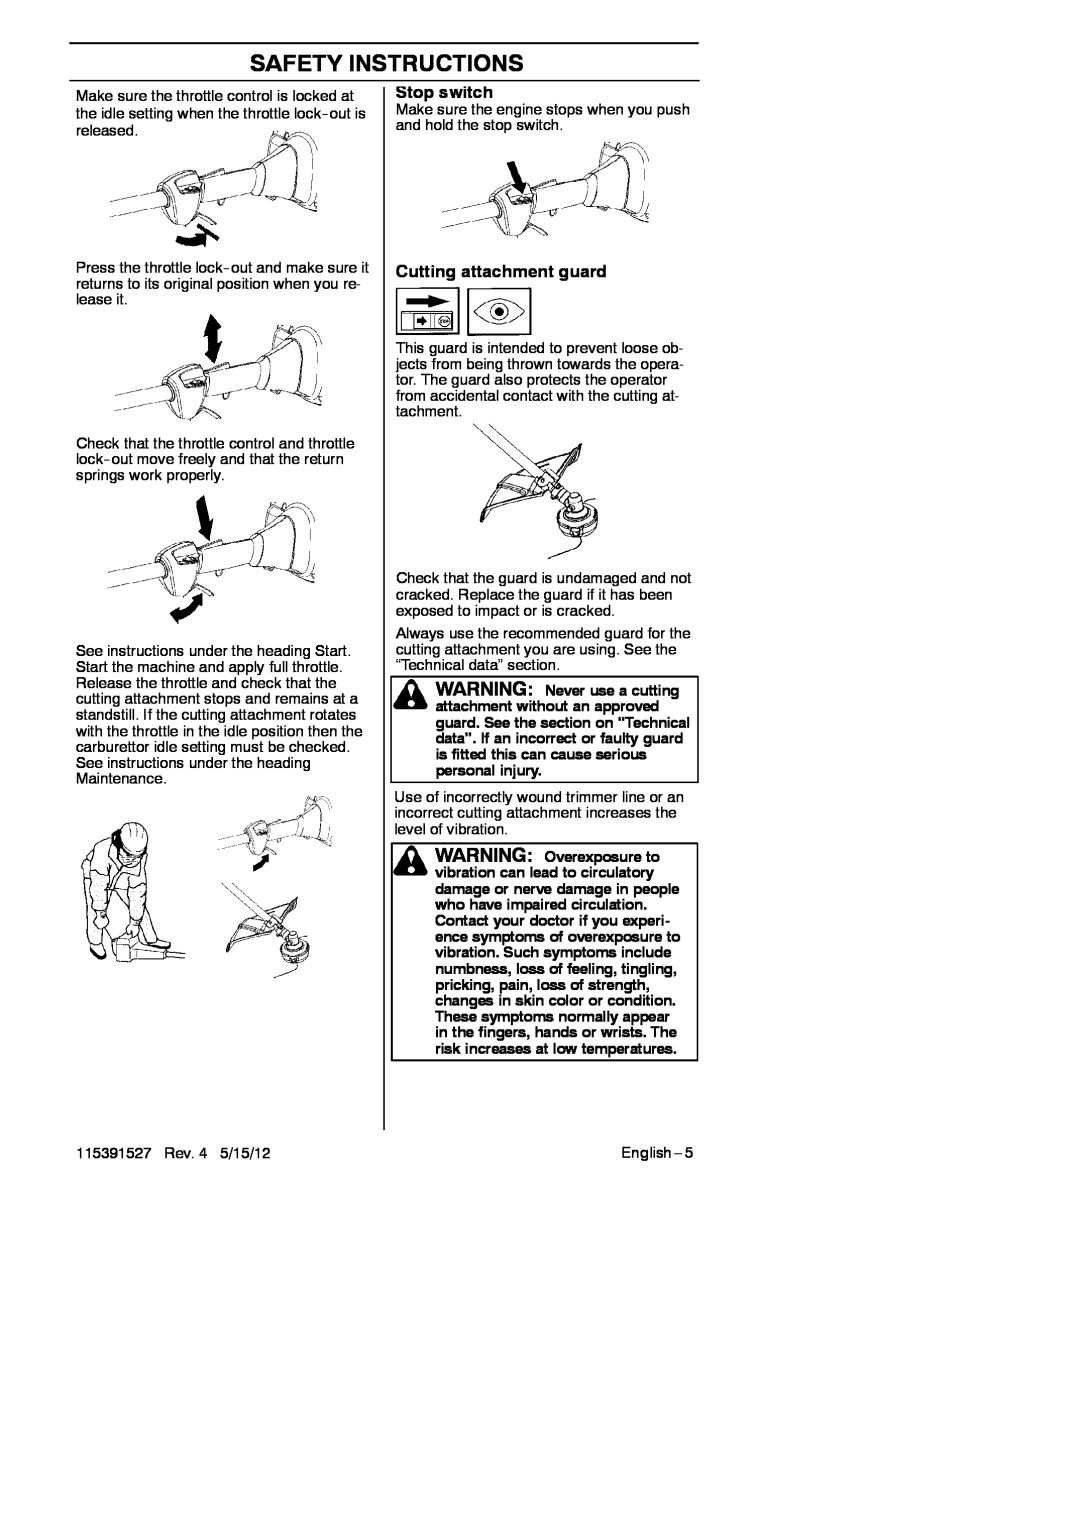 RedMax BC280 manual Stop switch, Cutting attachment guard, Safety Instructions 